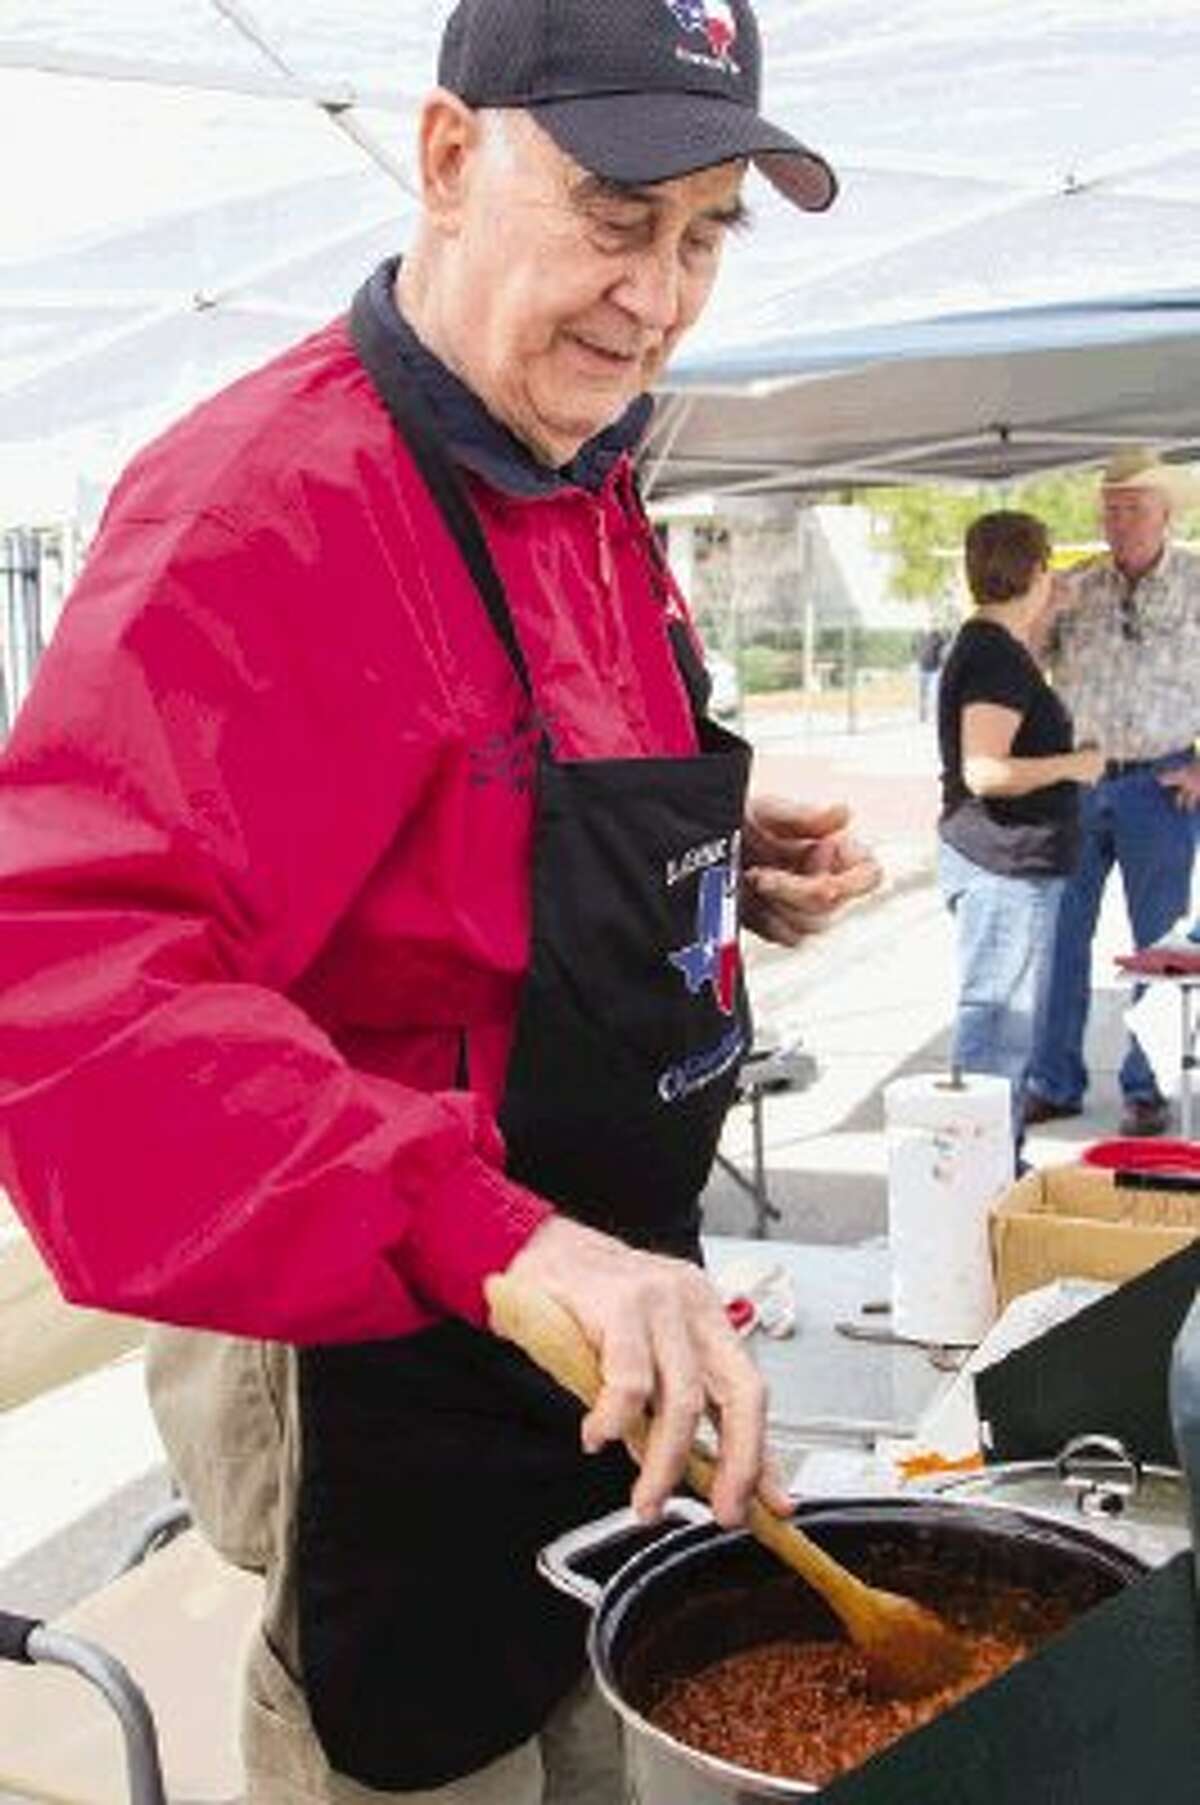 John Billy Murray of Houston competes in the “Boogie On The Blacktop” chili cook-off Saturday in downtown Conroe. Participants competed for points given by the Chili Appreciation Society International to earn a place at the 2014 Original Terlingua International Championship Chili Cookoff. To view or purchase this photo and others like it, visit HCNpics.com.